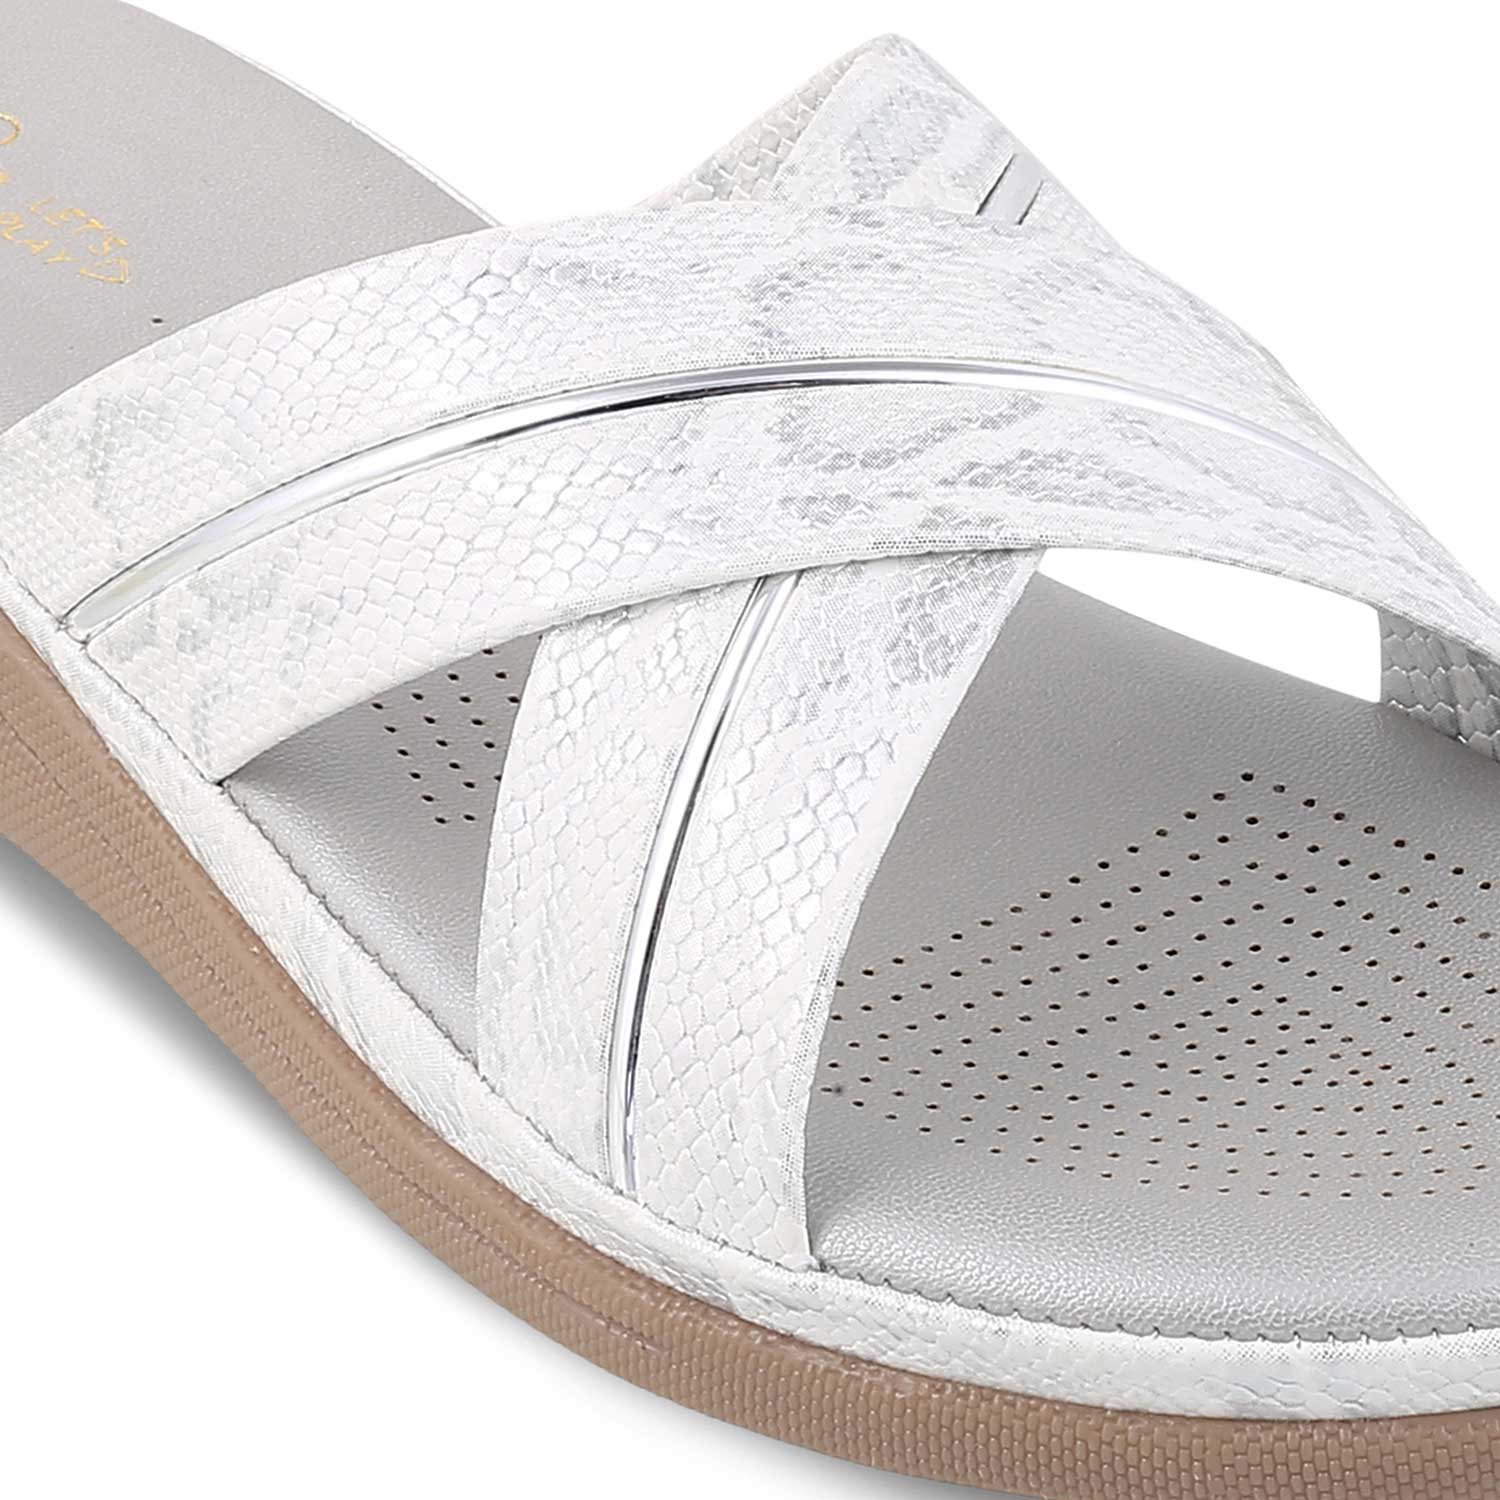 The Slide Silver Women's Casual Flats Tresmode